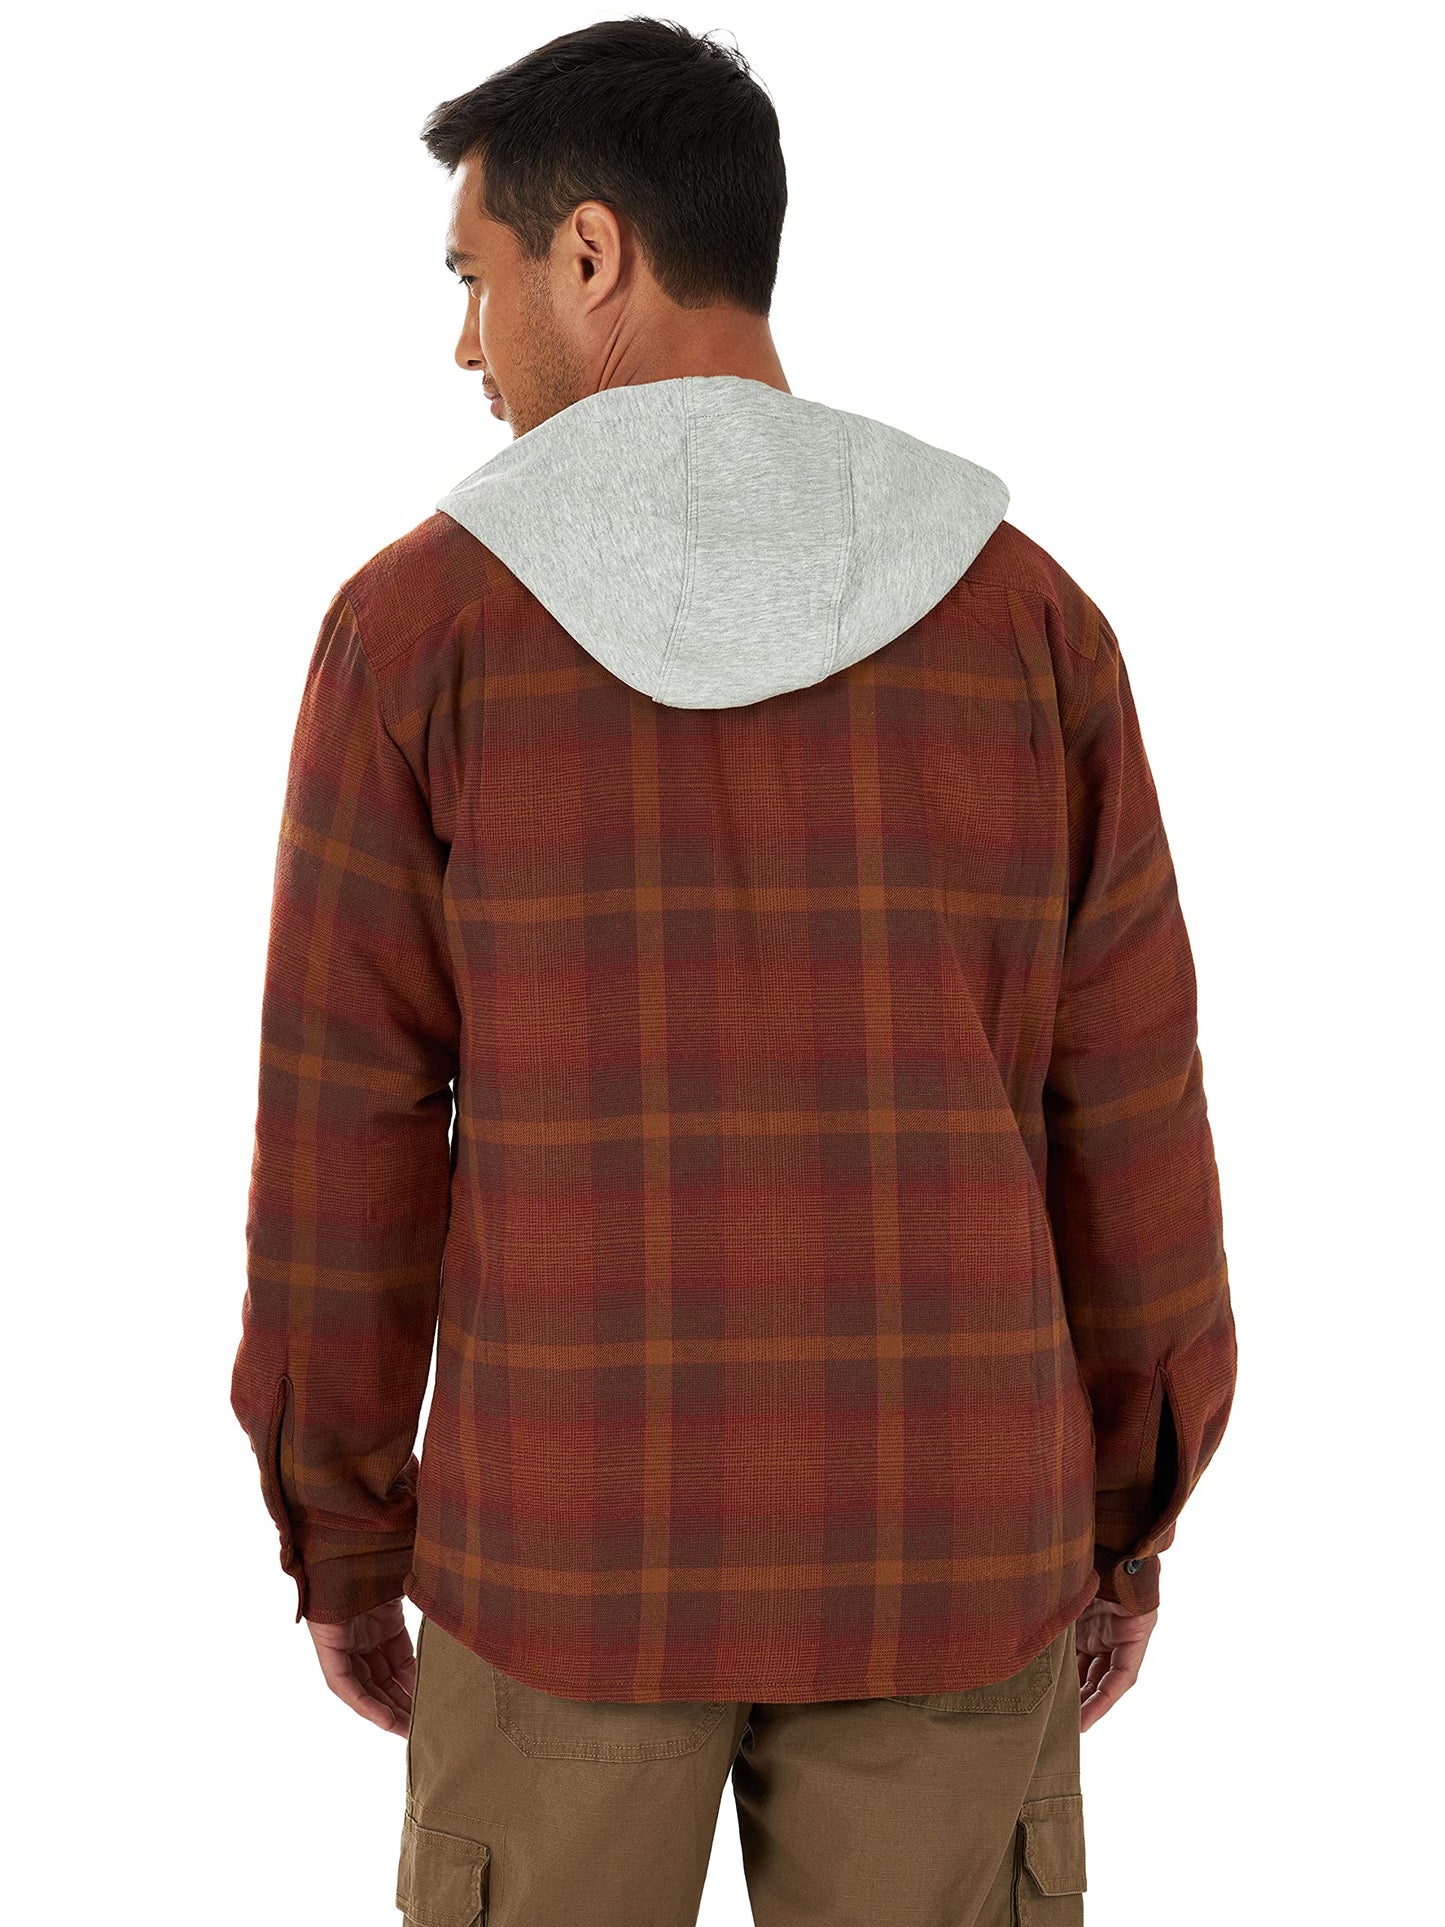 Wrangler Authentics Men's Long Sleeve Quilted Lined Flannel Shirt Jacket with Hood, Toffee, X-Large